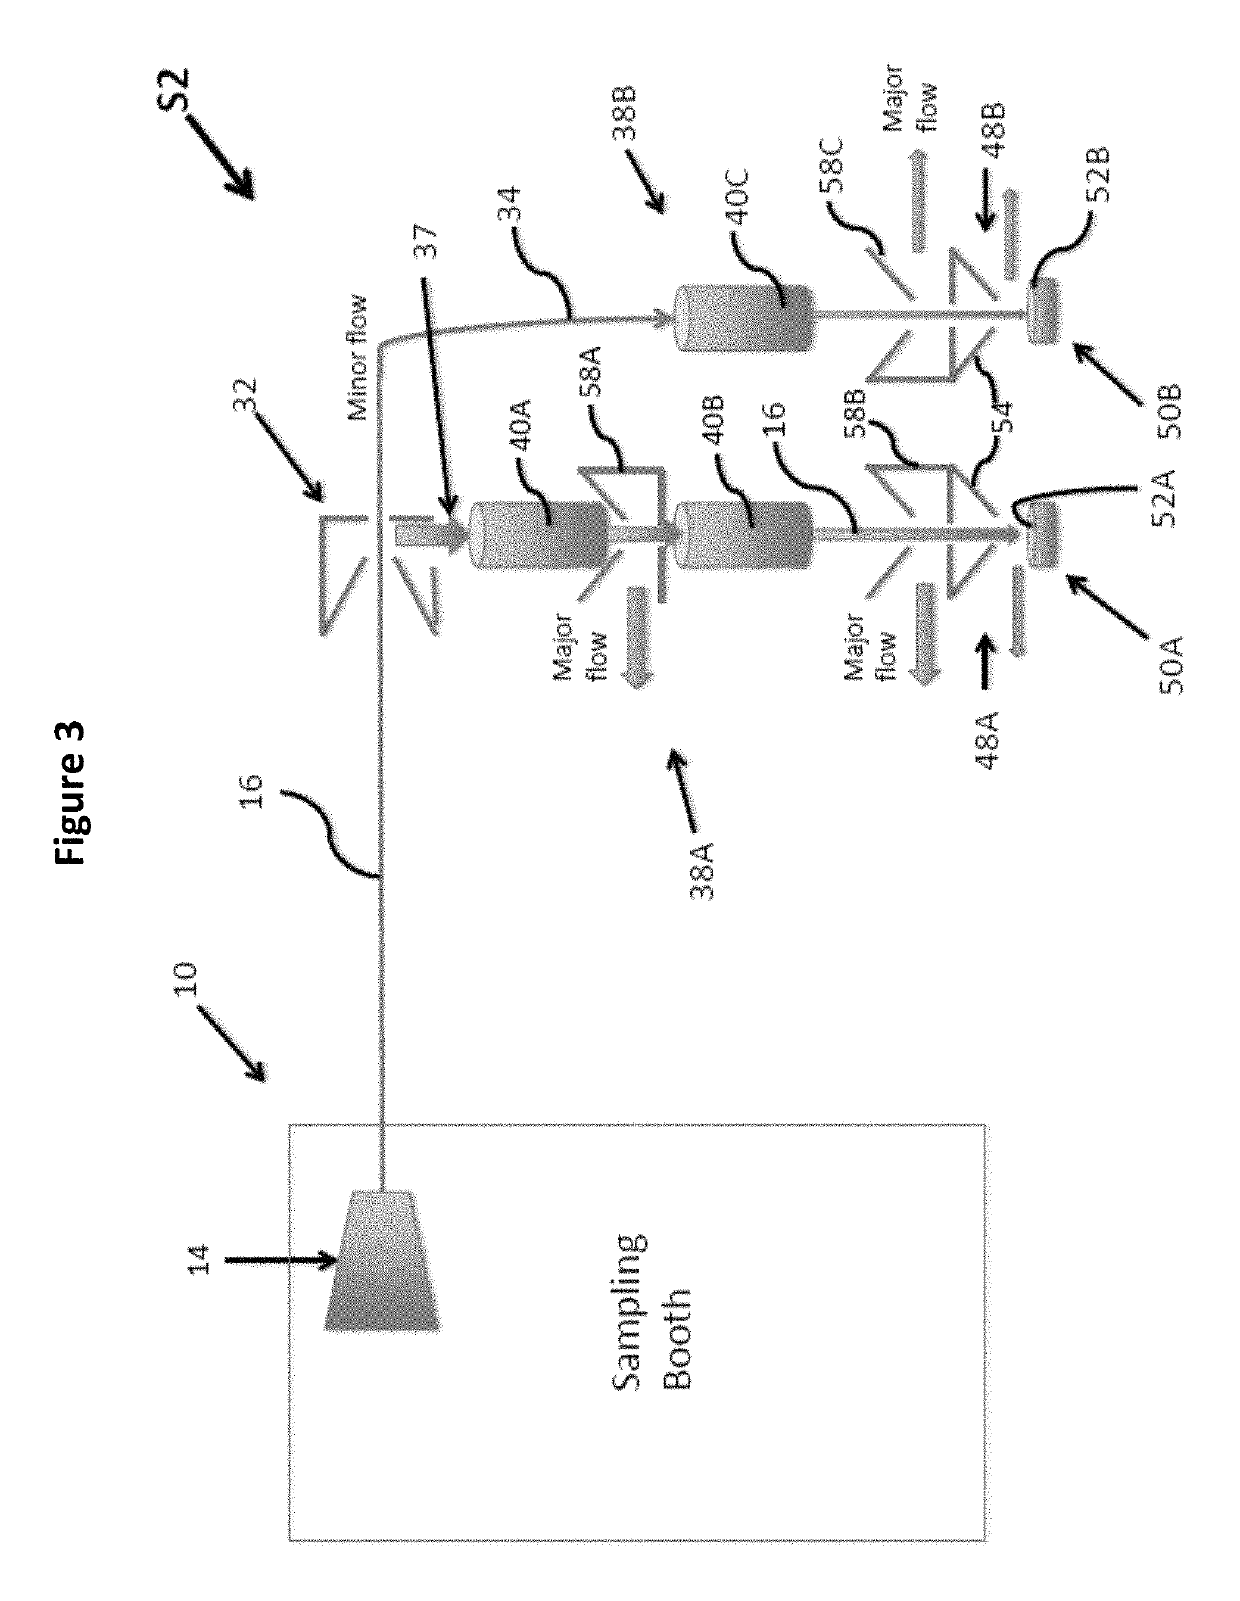 Aerosol collection system and method